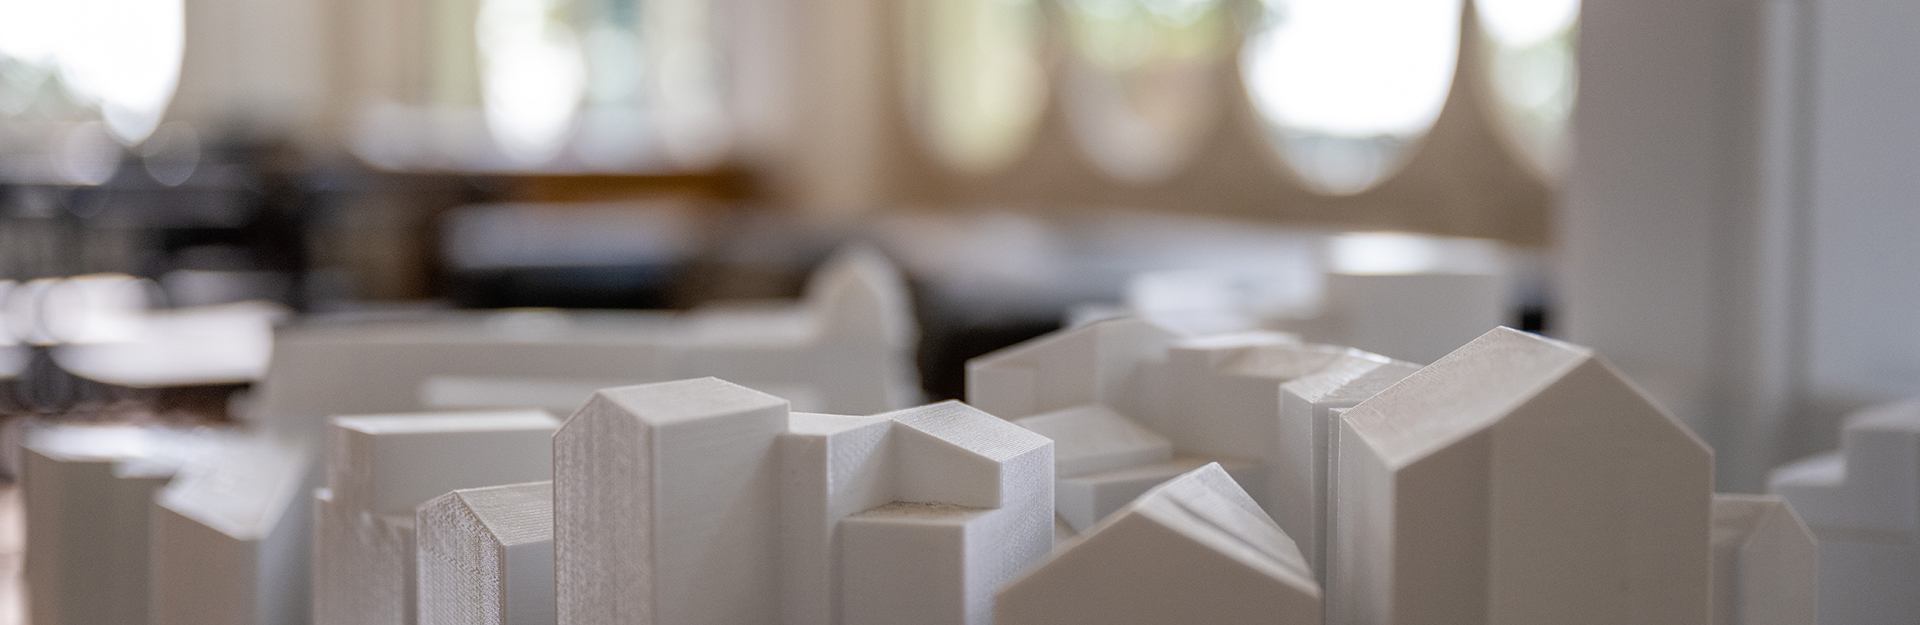 Image of white architectural models